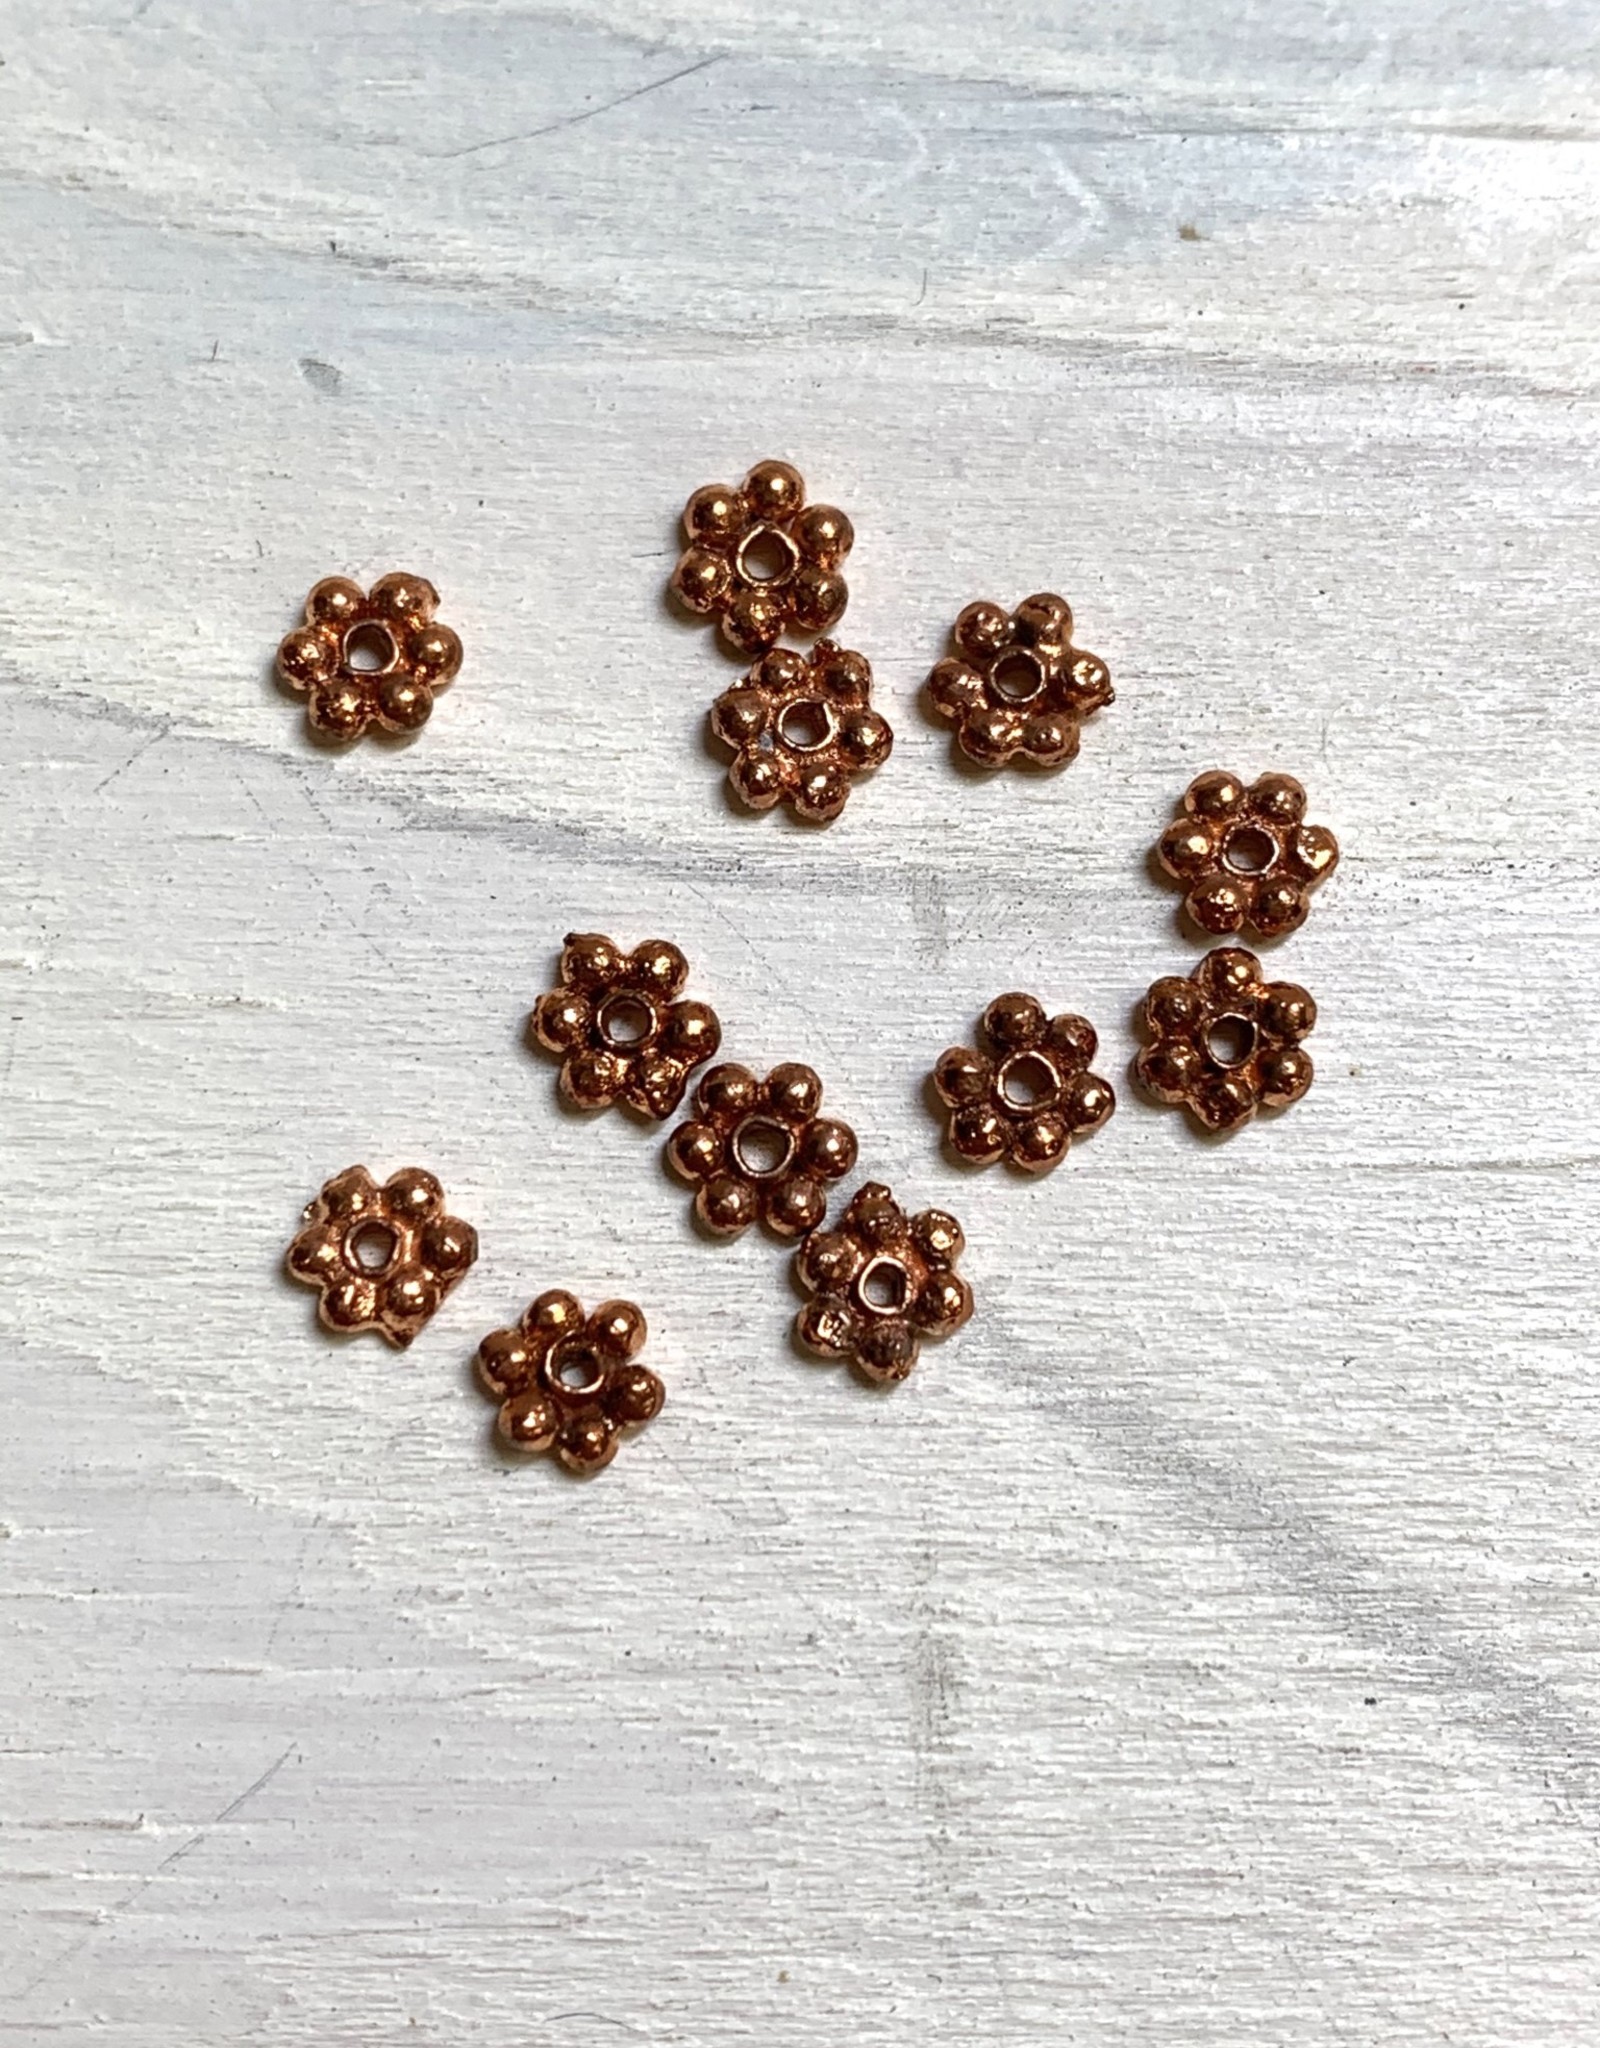 4mm Daisies Copper Plate Qty 12